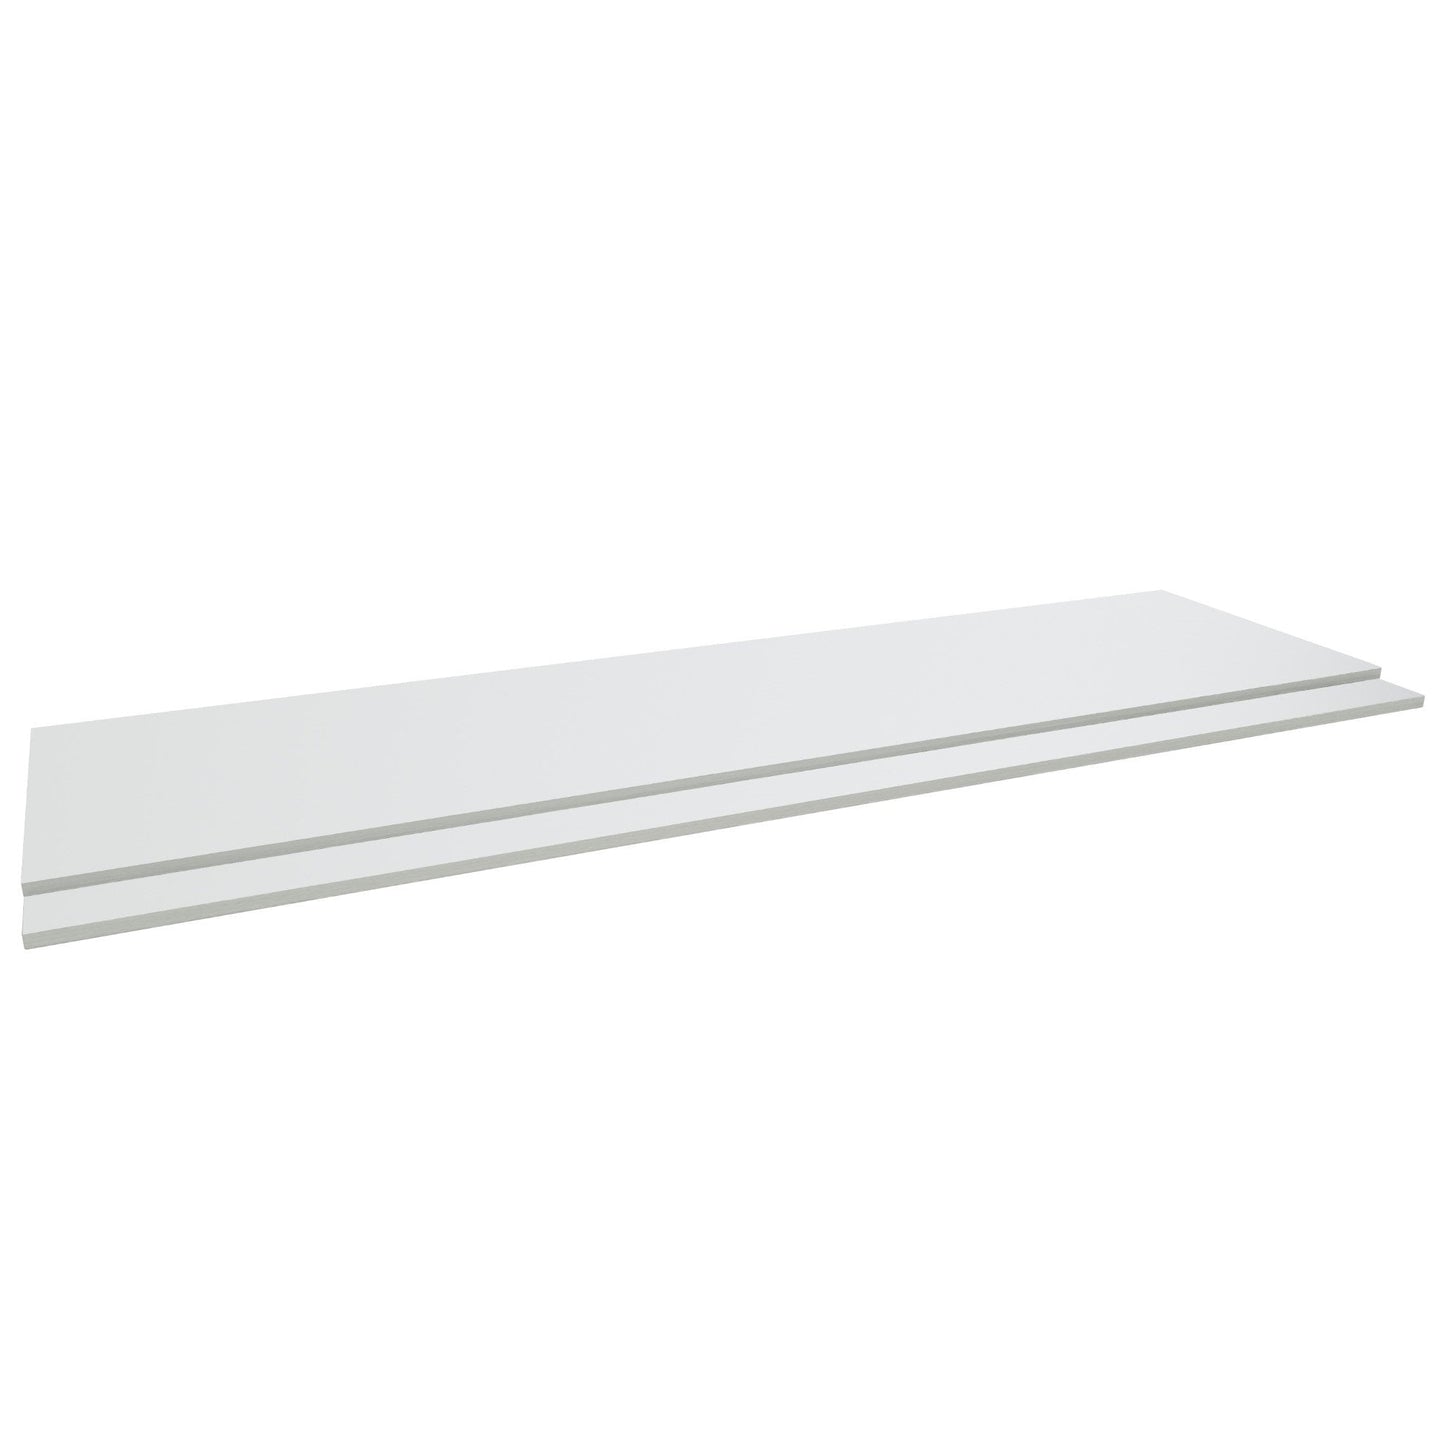 Purity 1800mm 2 Piece Front Panel White